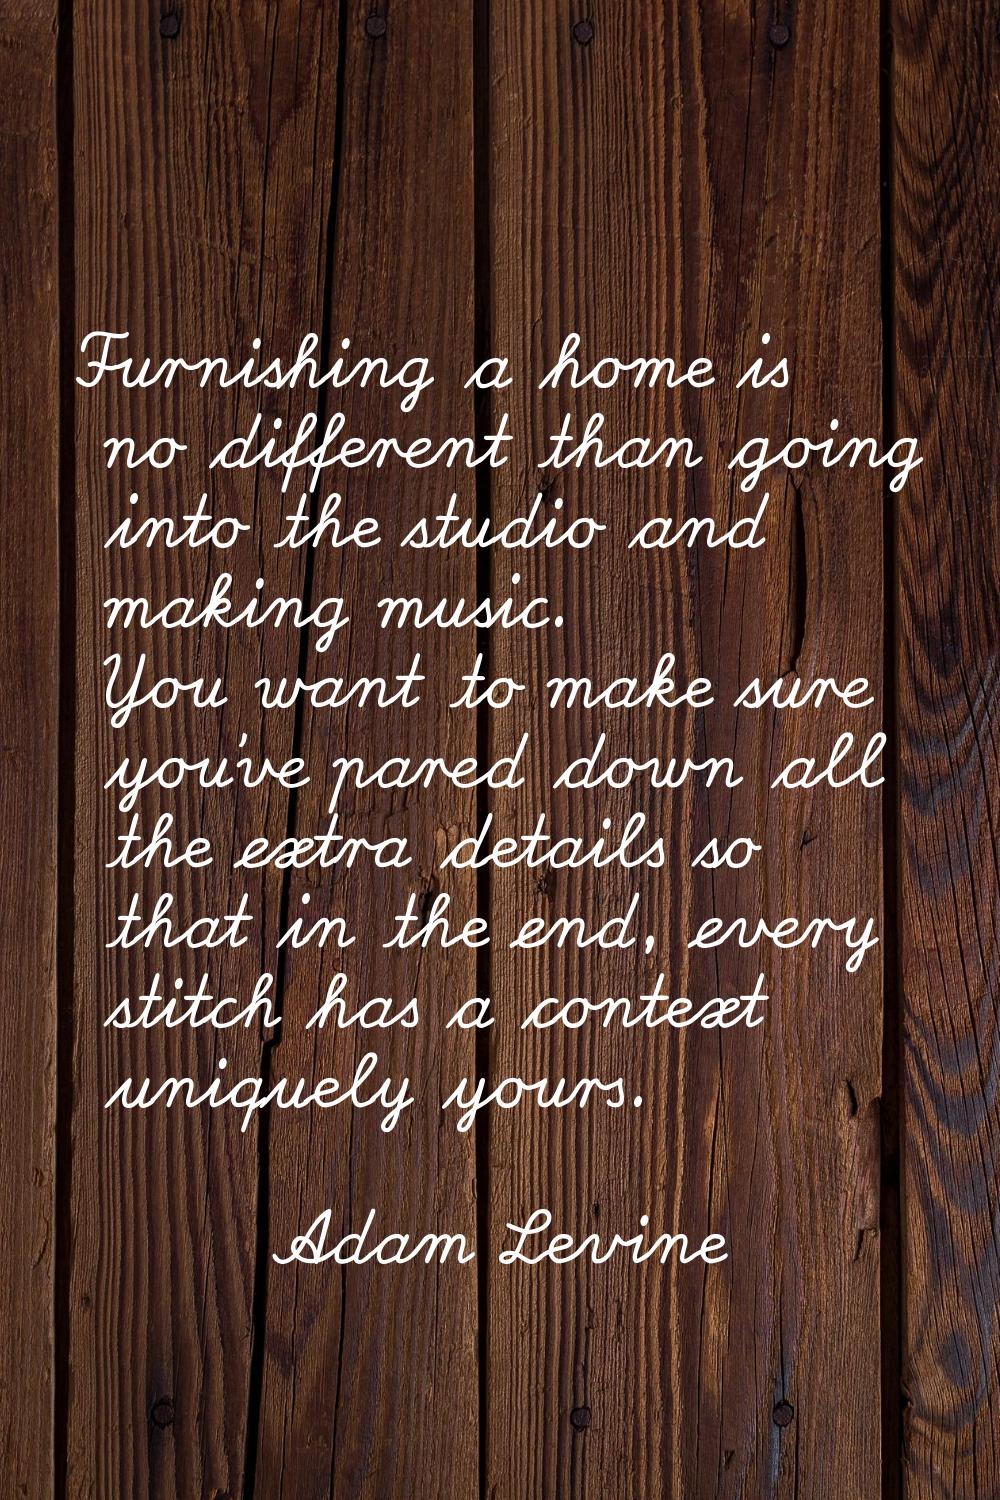 Furnishing a home is no different than going into the studio and making music. You want to make sur